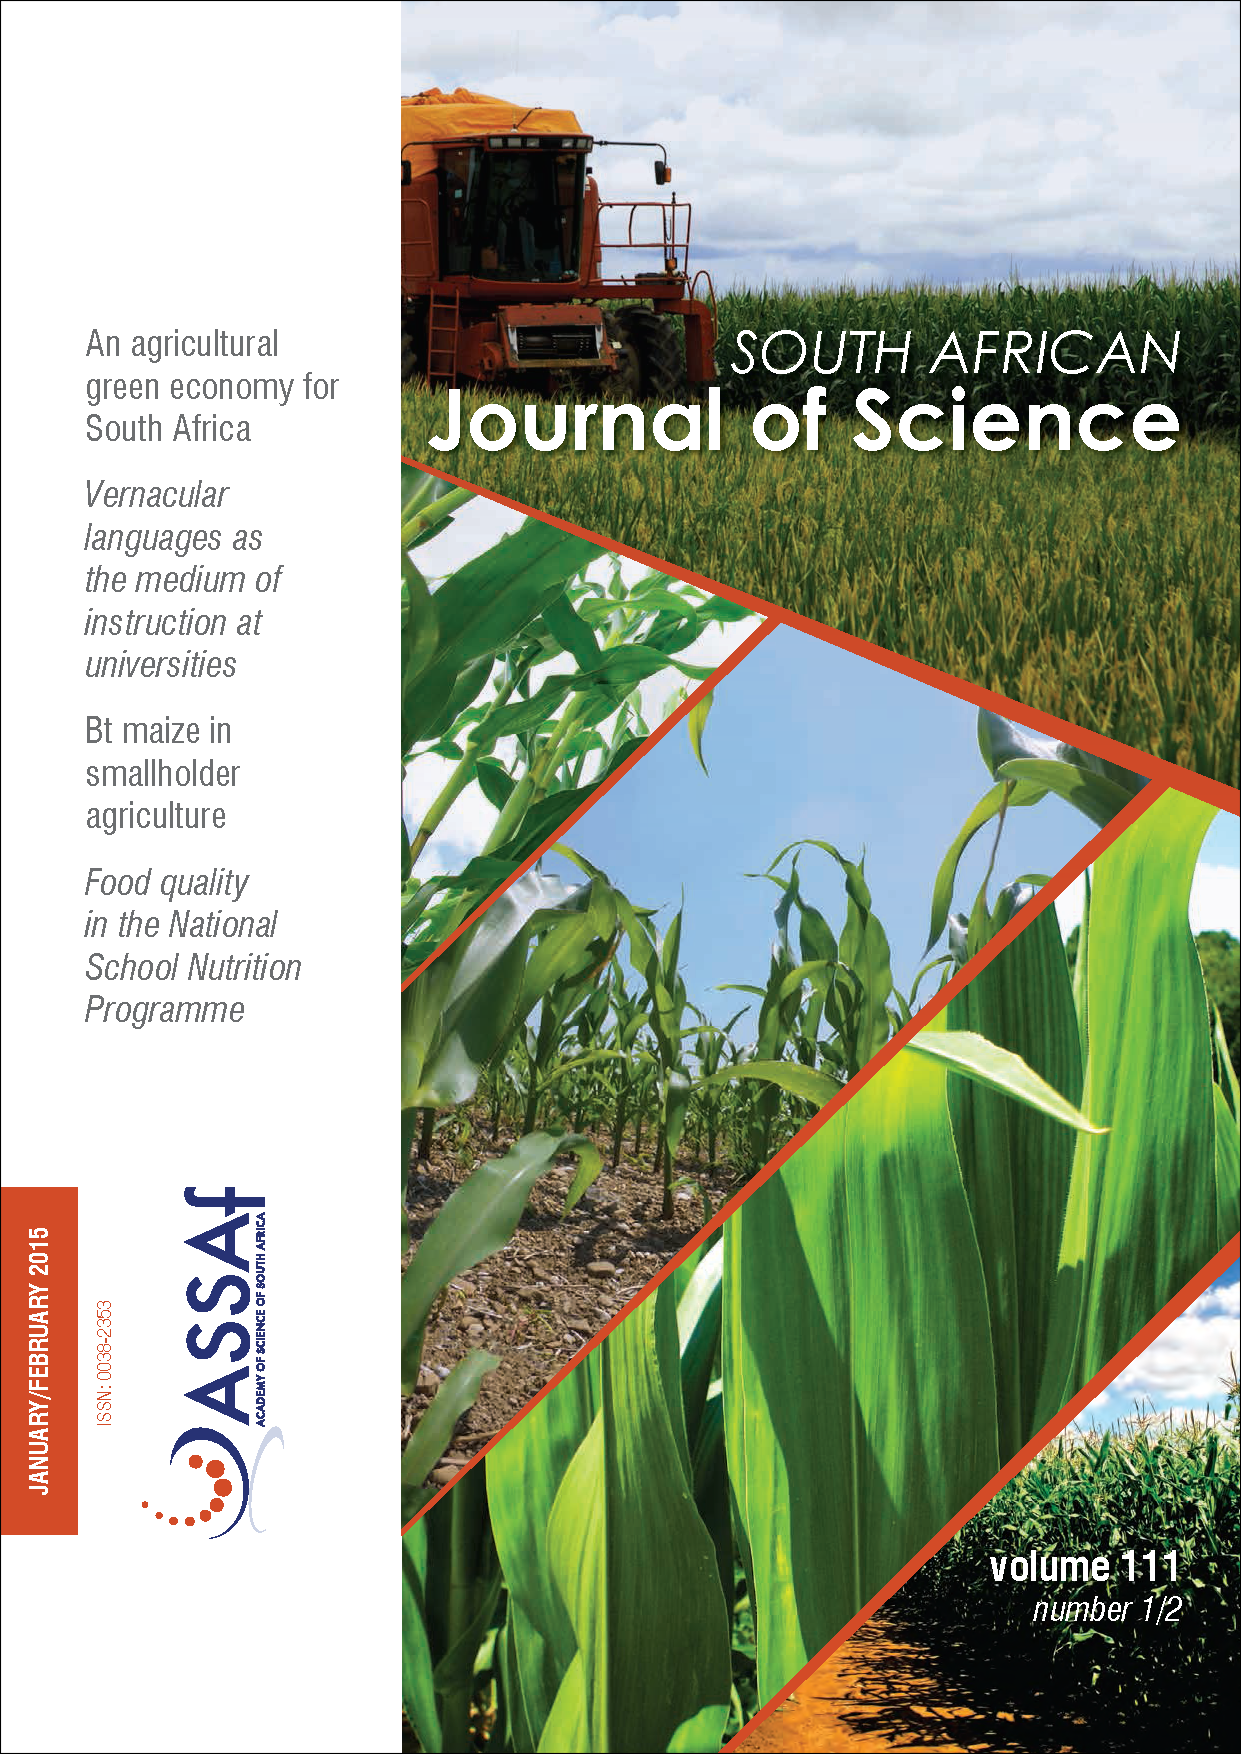 					View Vol. 111 No. 1/2 (2015): South African Journal of Science
				